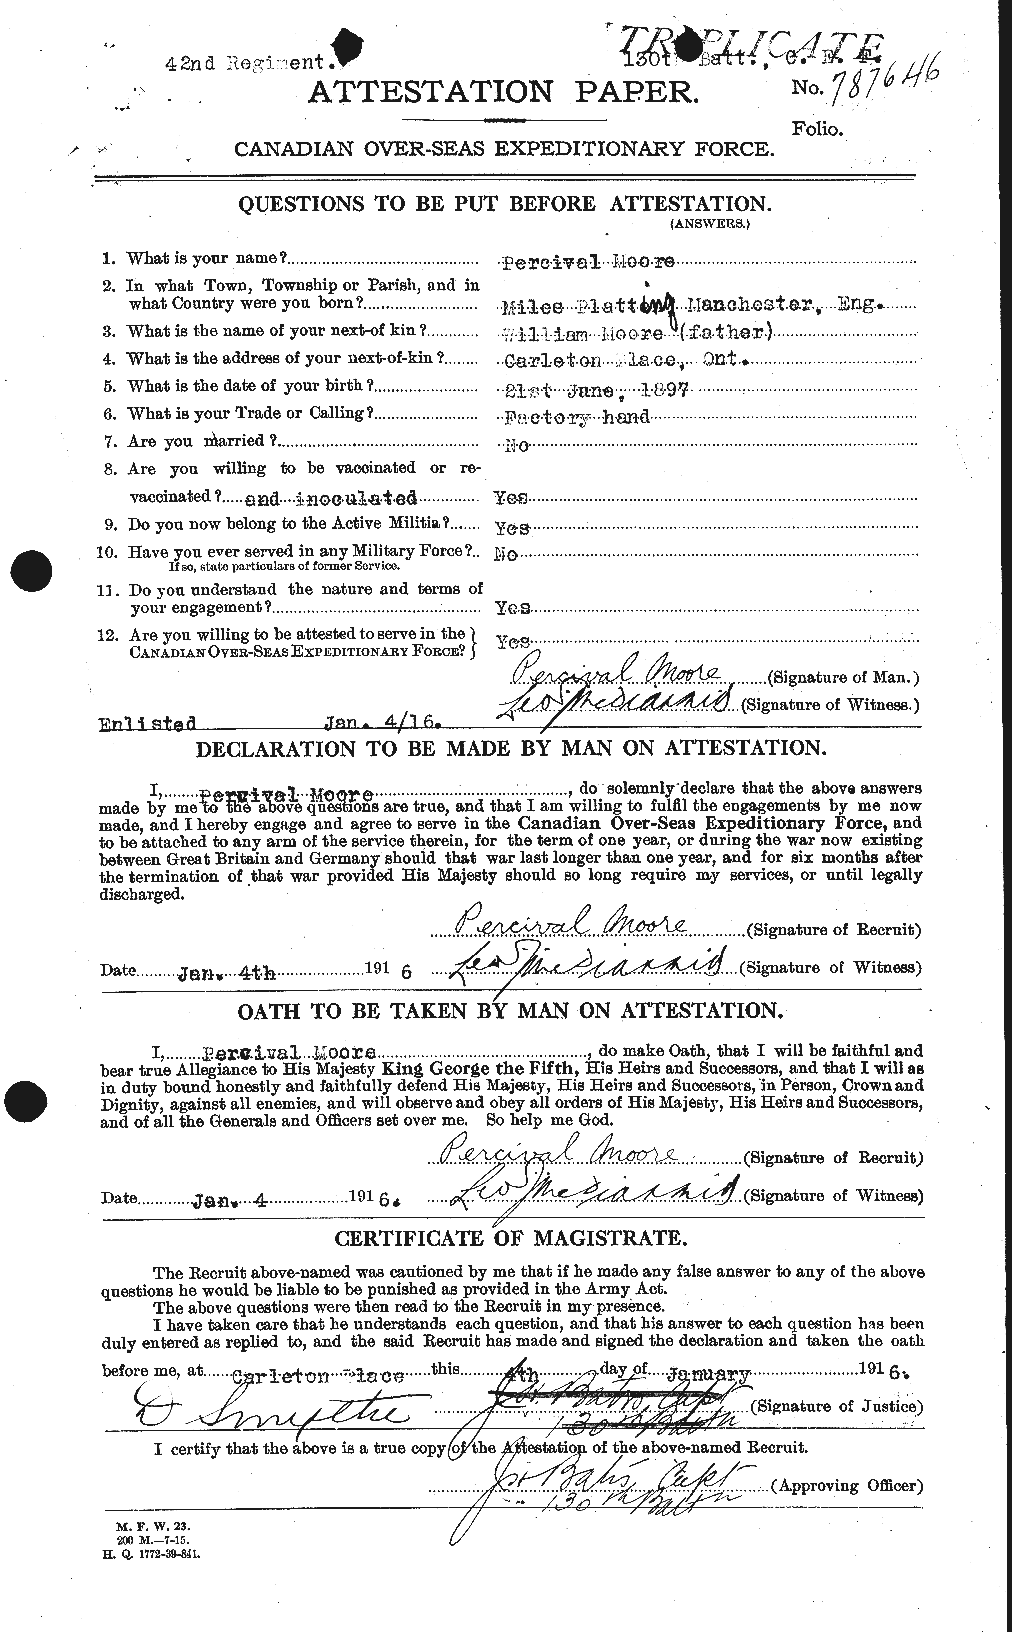 Personnel Records of the First World War - CEF 503478a